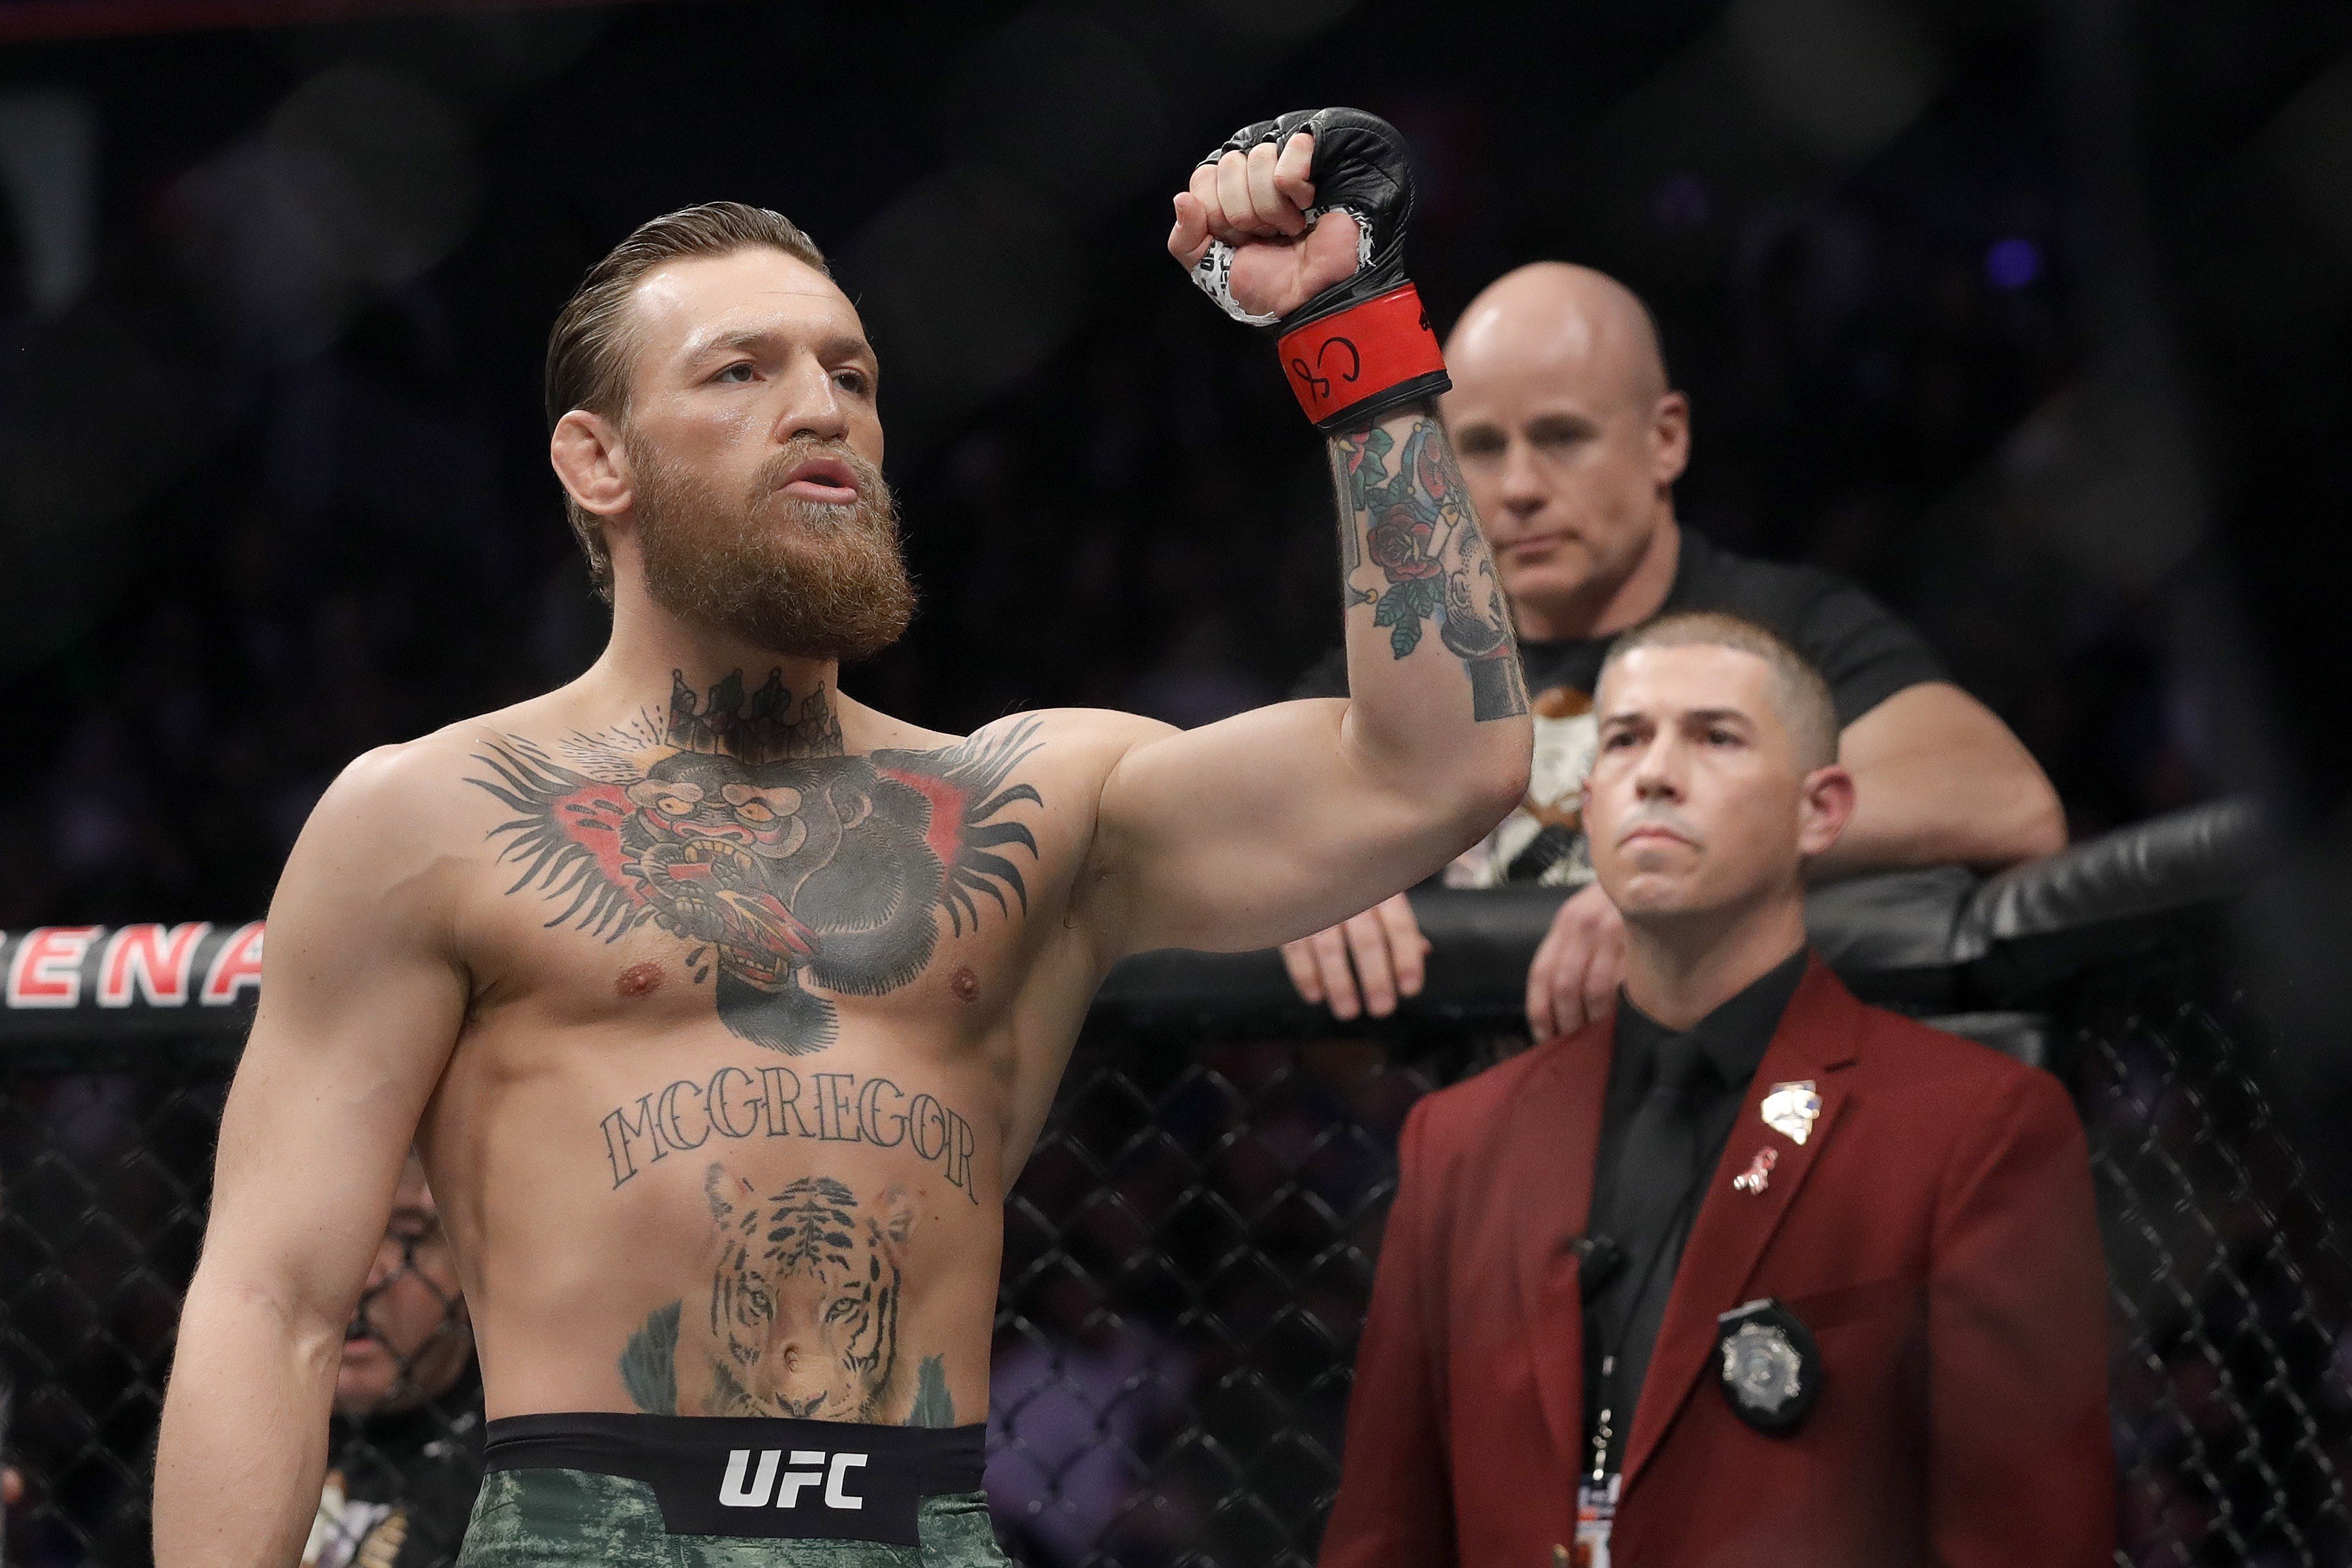 Conor McGregor reacts before taking on Donald Cerrone at UFC 246. Photo: AFP